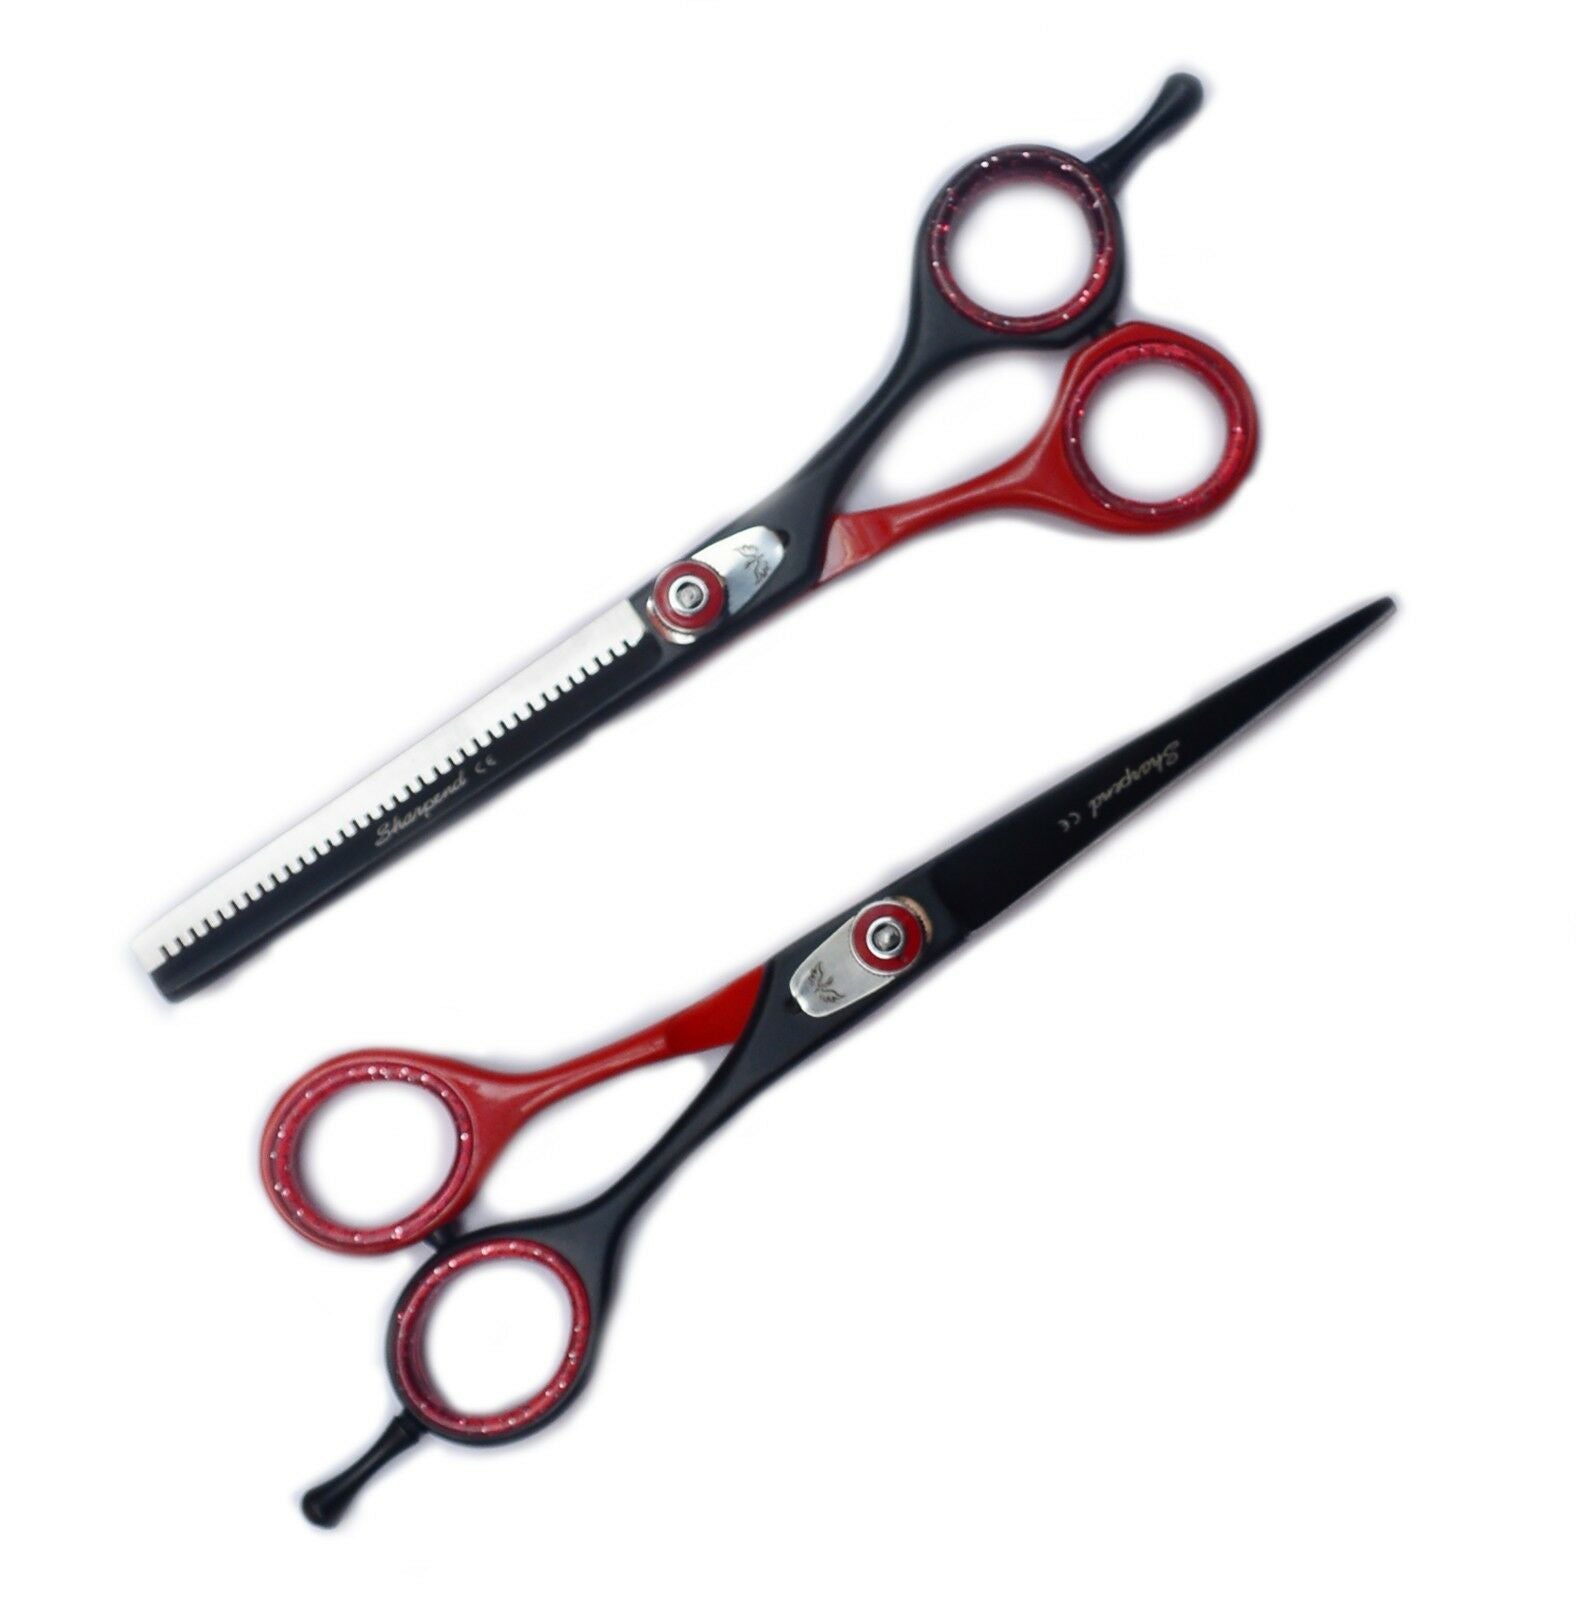 Ultimate Barber Hair Cutting Scissors And Comb Shear Set - Westfield Retailers